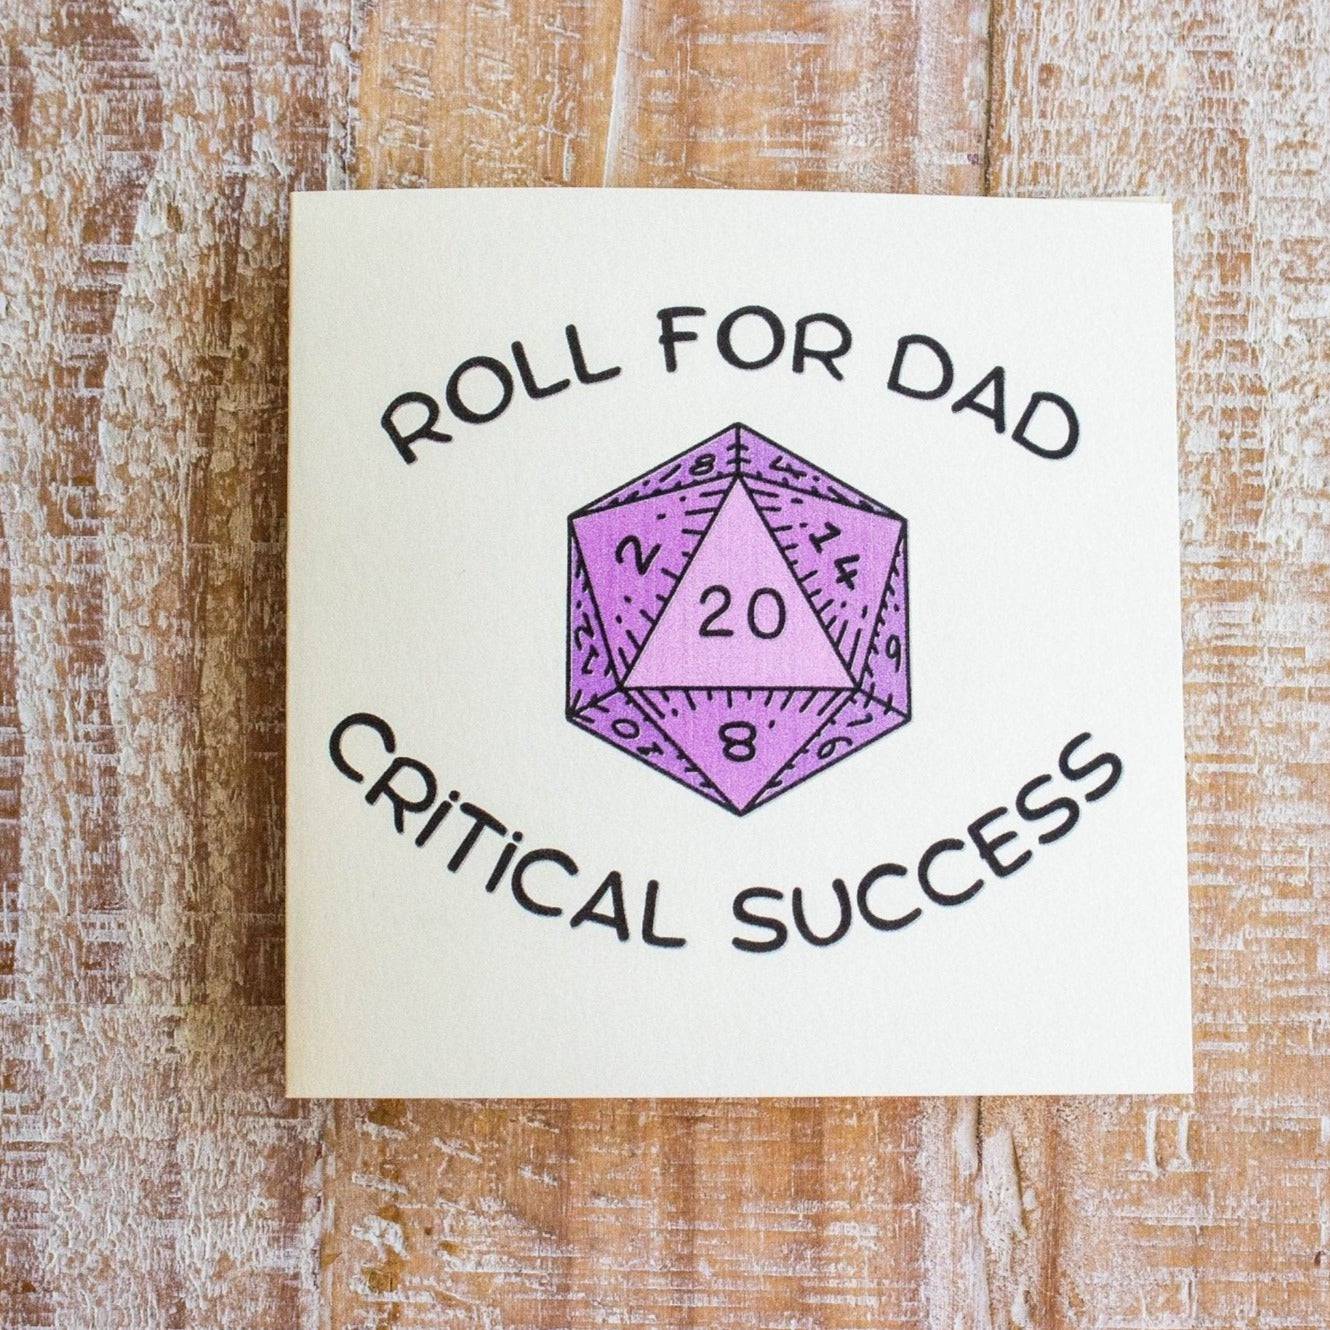 Roll for Dad - Fathers Day DnD Card - Mystery Dice Goblin